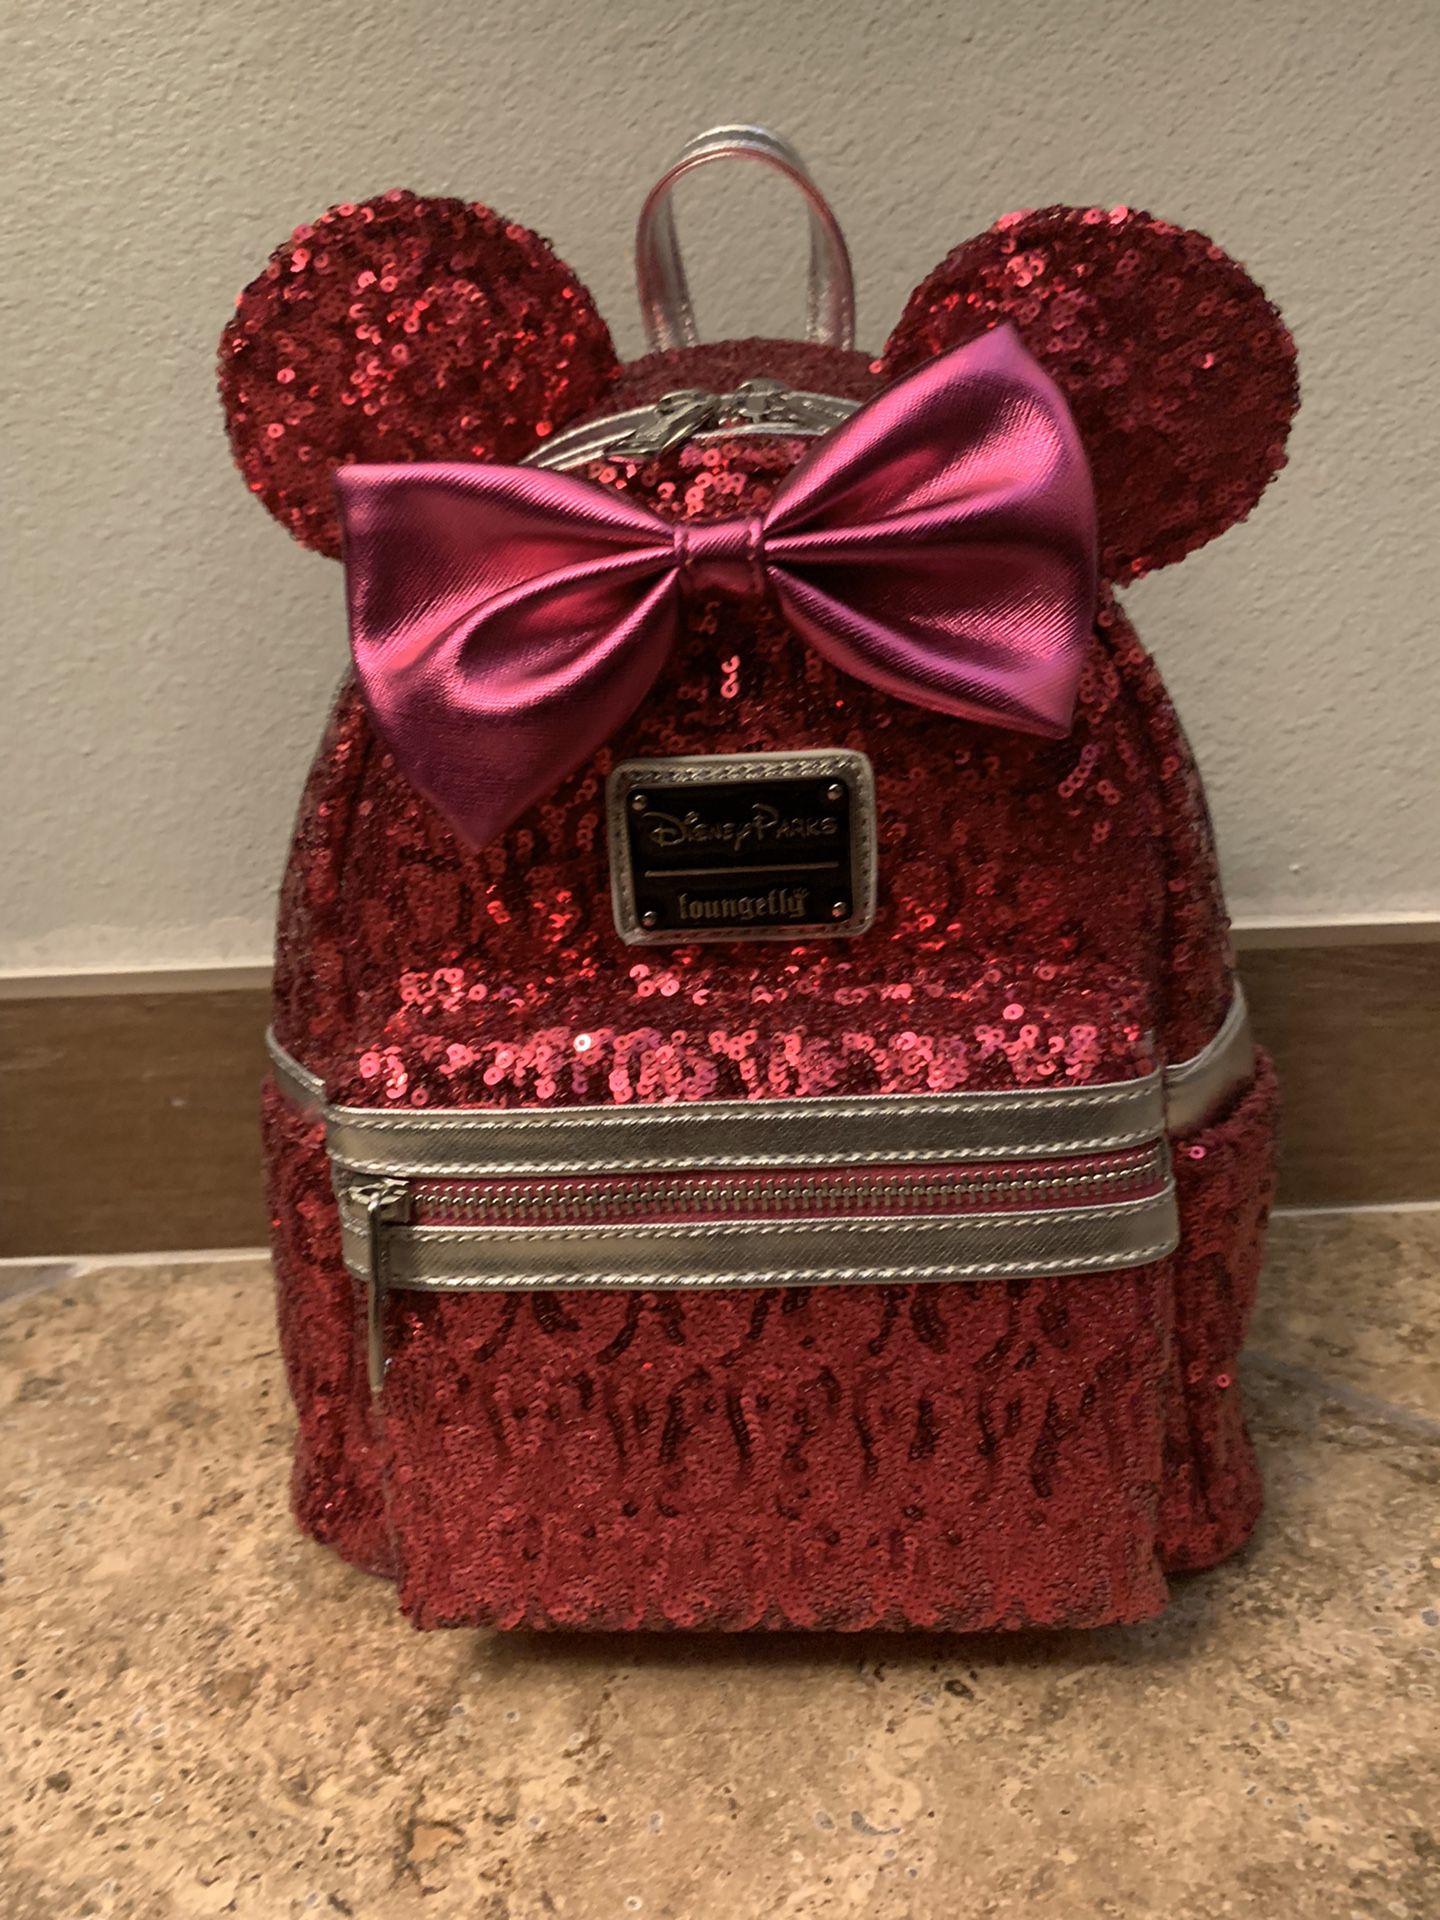 Minnie Mouse Sequin Mini Backpack By Loungefly - Imagination Pink